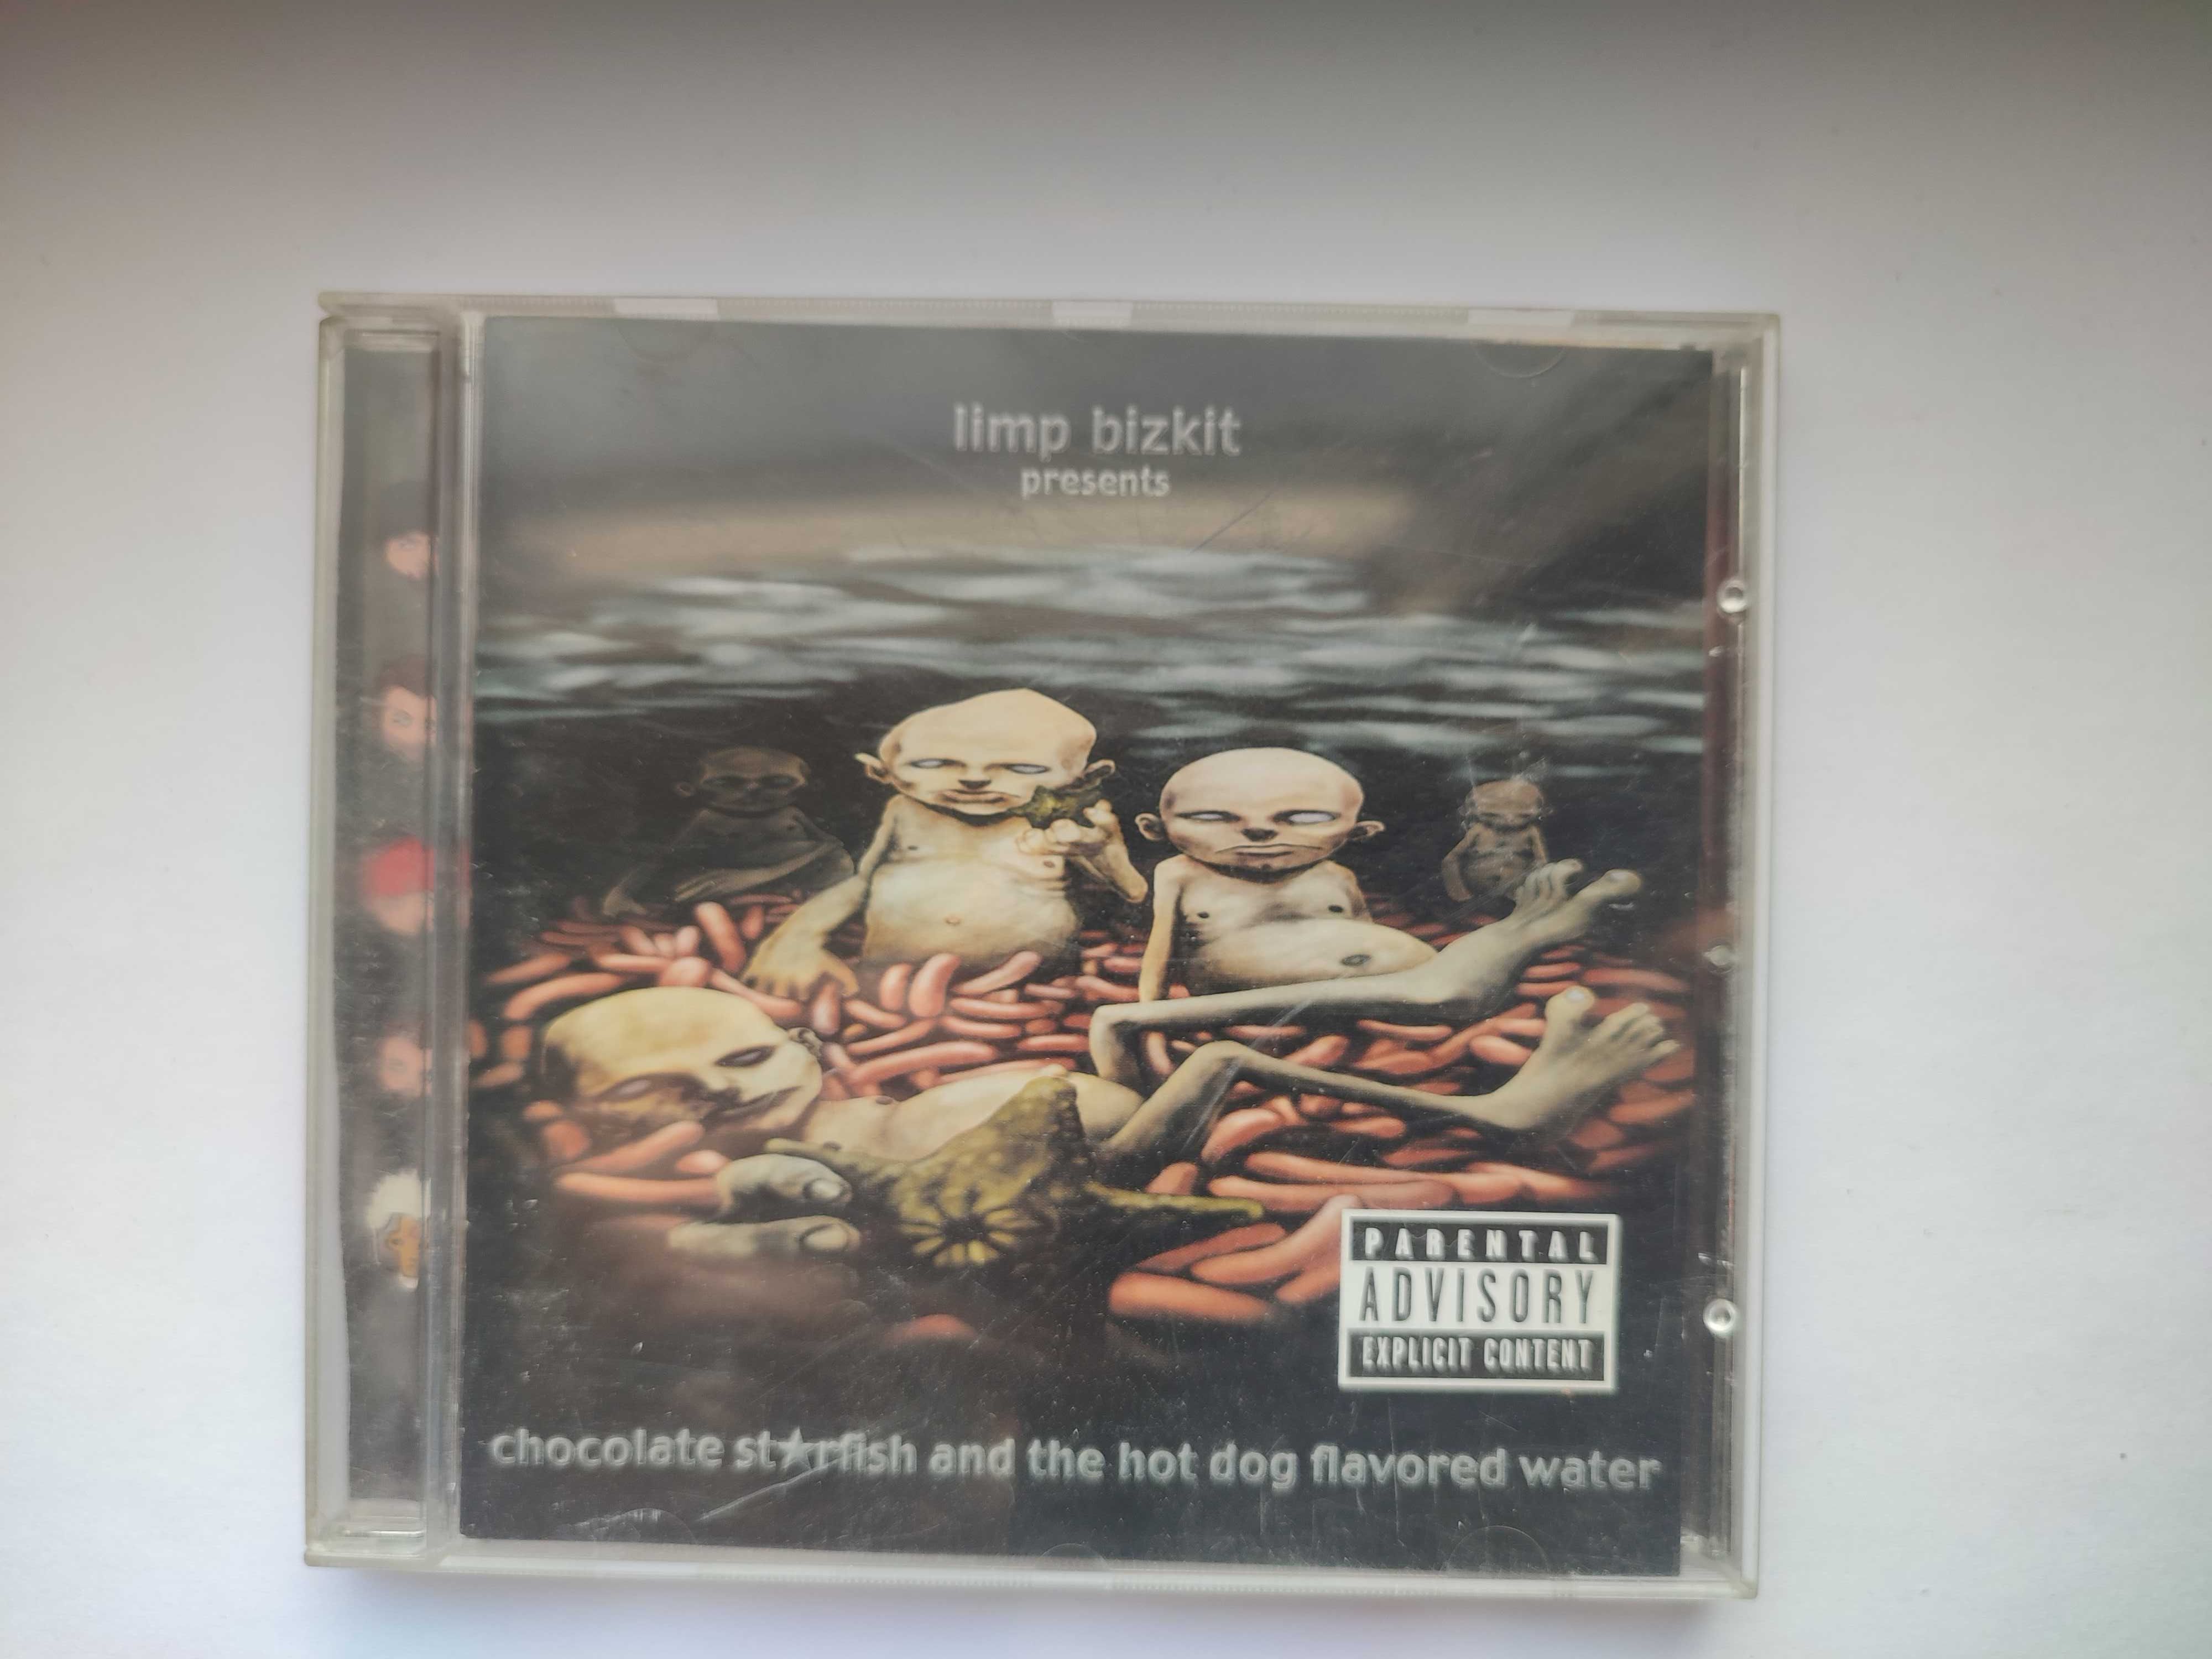 Limp Bizkit-Chocolate Starfish and the Hot Dog Flavored Water 2000r.